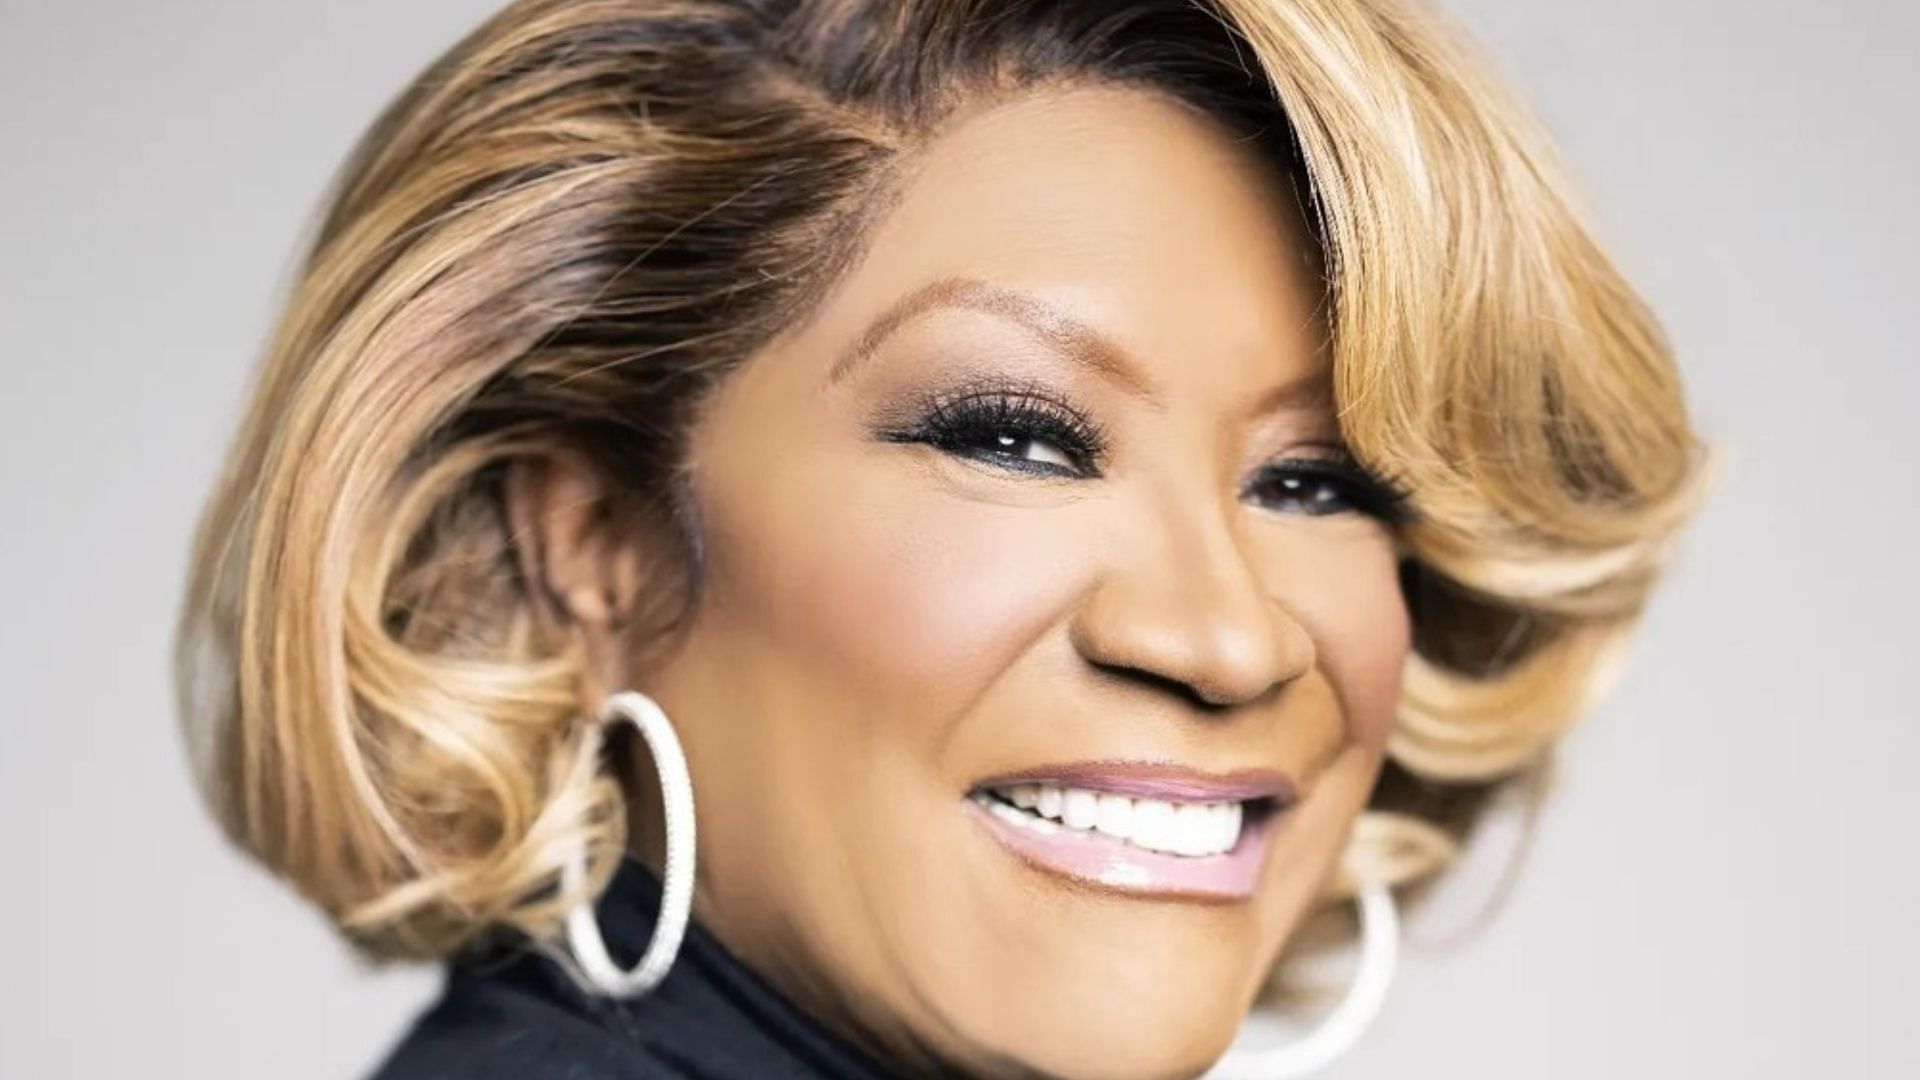 Patti LaBelle opened up about turning 80 (Image via Instagram/@mspattilabelle)